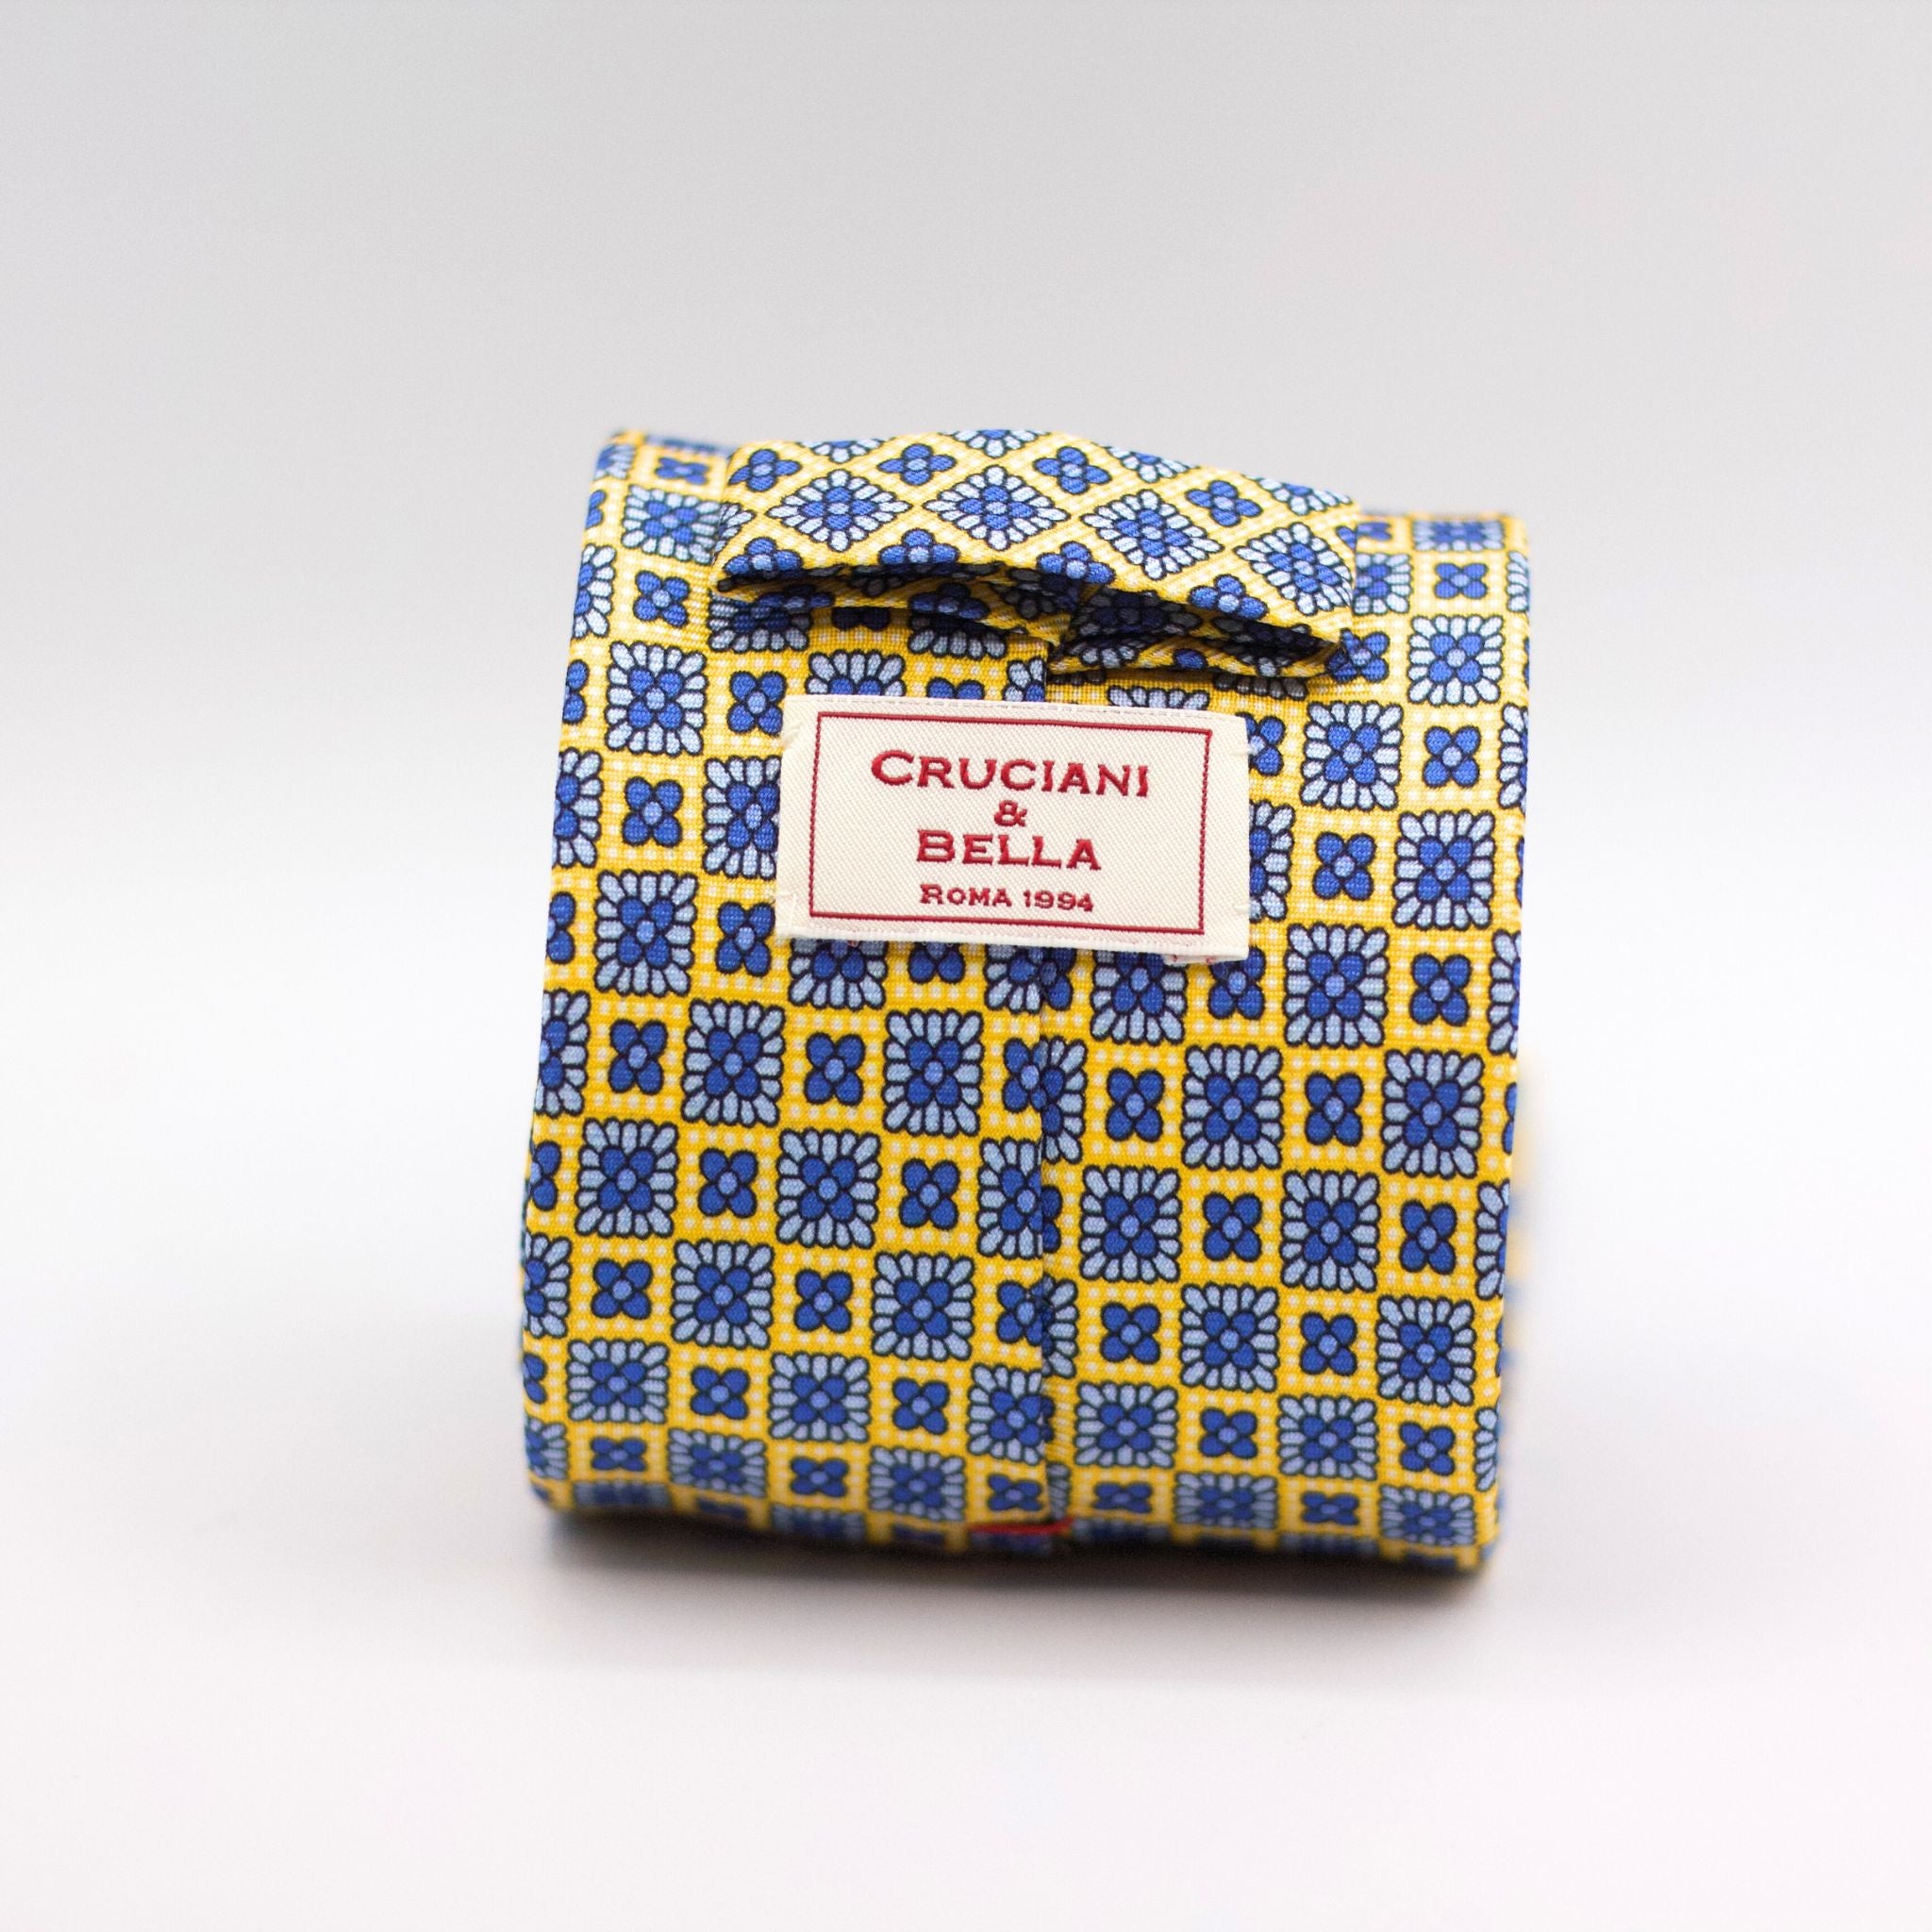 Cruciani & Bella 100% Silk Printed Self-Tipped Yellow, Blue and Baby Blue Motif Tie Handmade in Rome, Italy. 8 cm x 150 cm